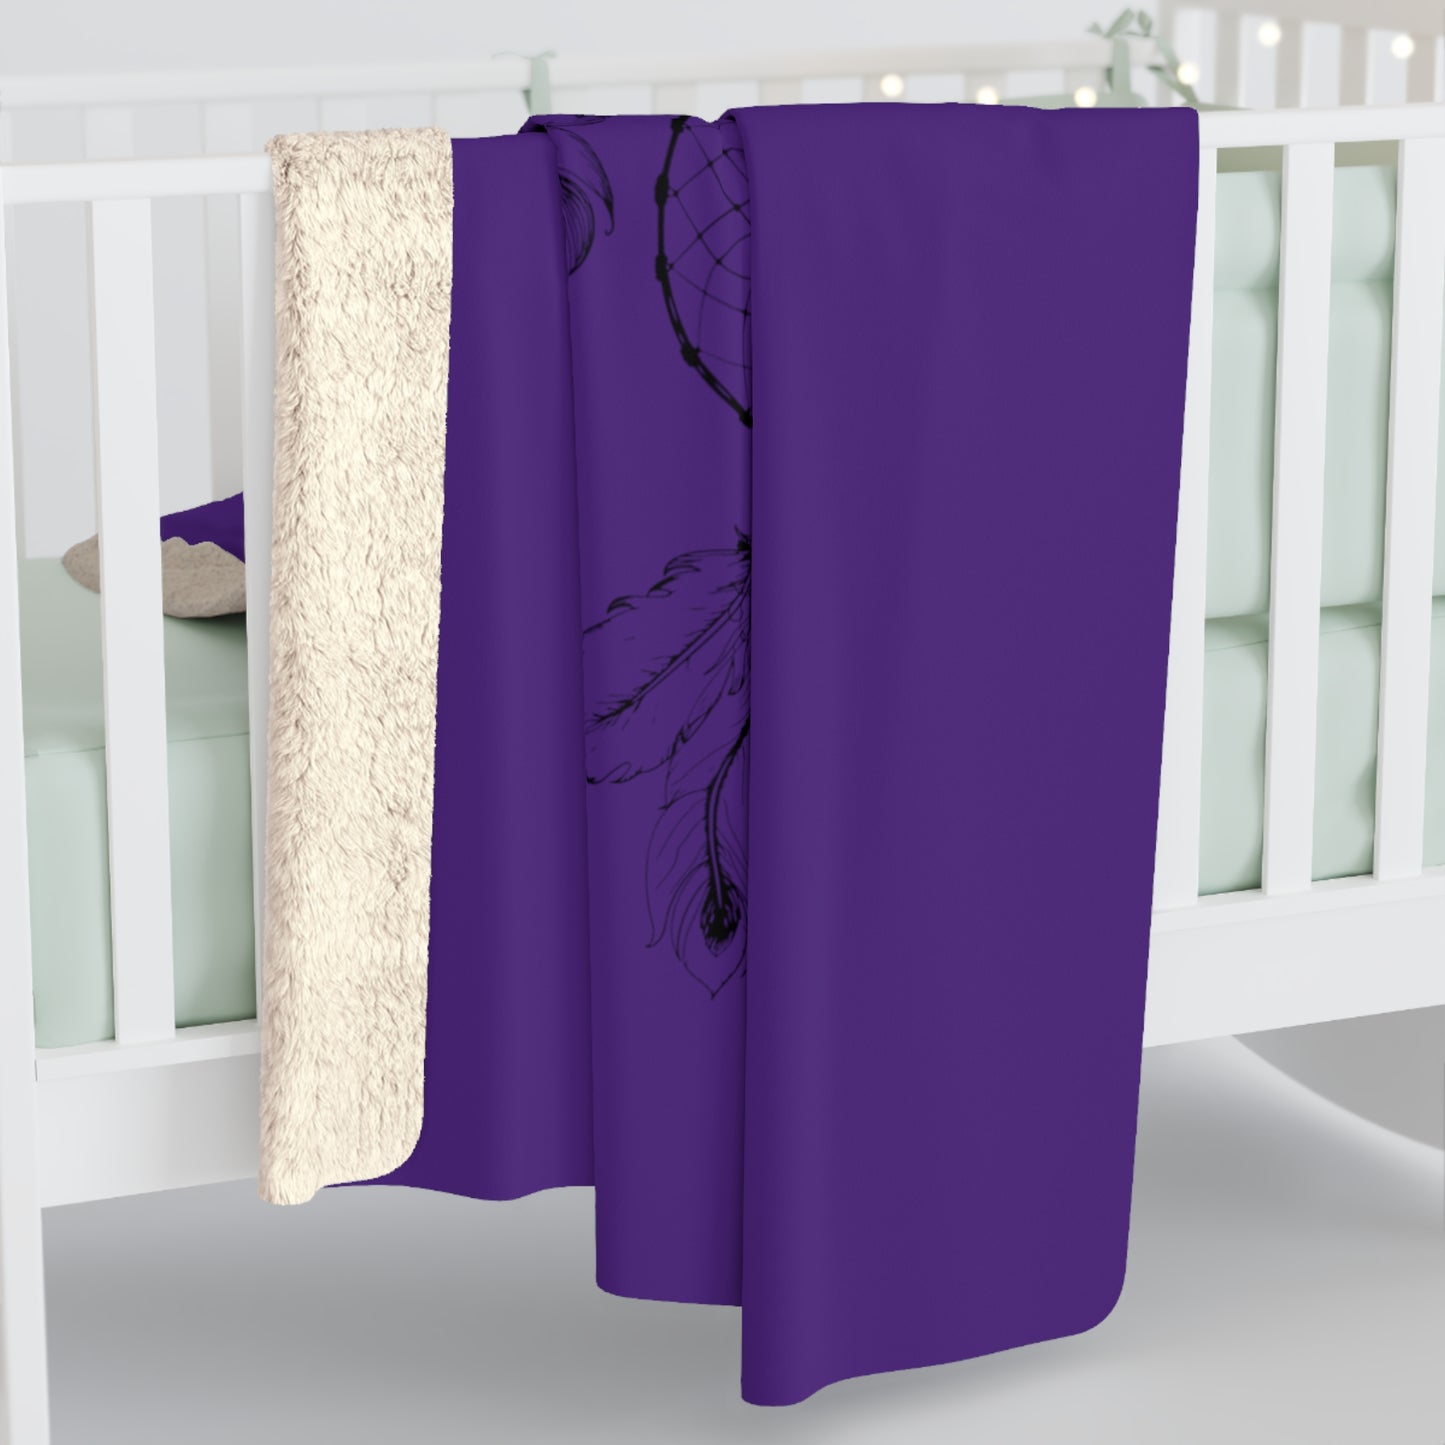 LUXURIOUS COZY BLANKET: THE EPITOME OF COMFORT AND WARMTH | Dream Catcher2 Violet 